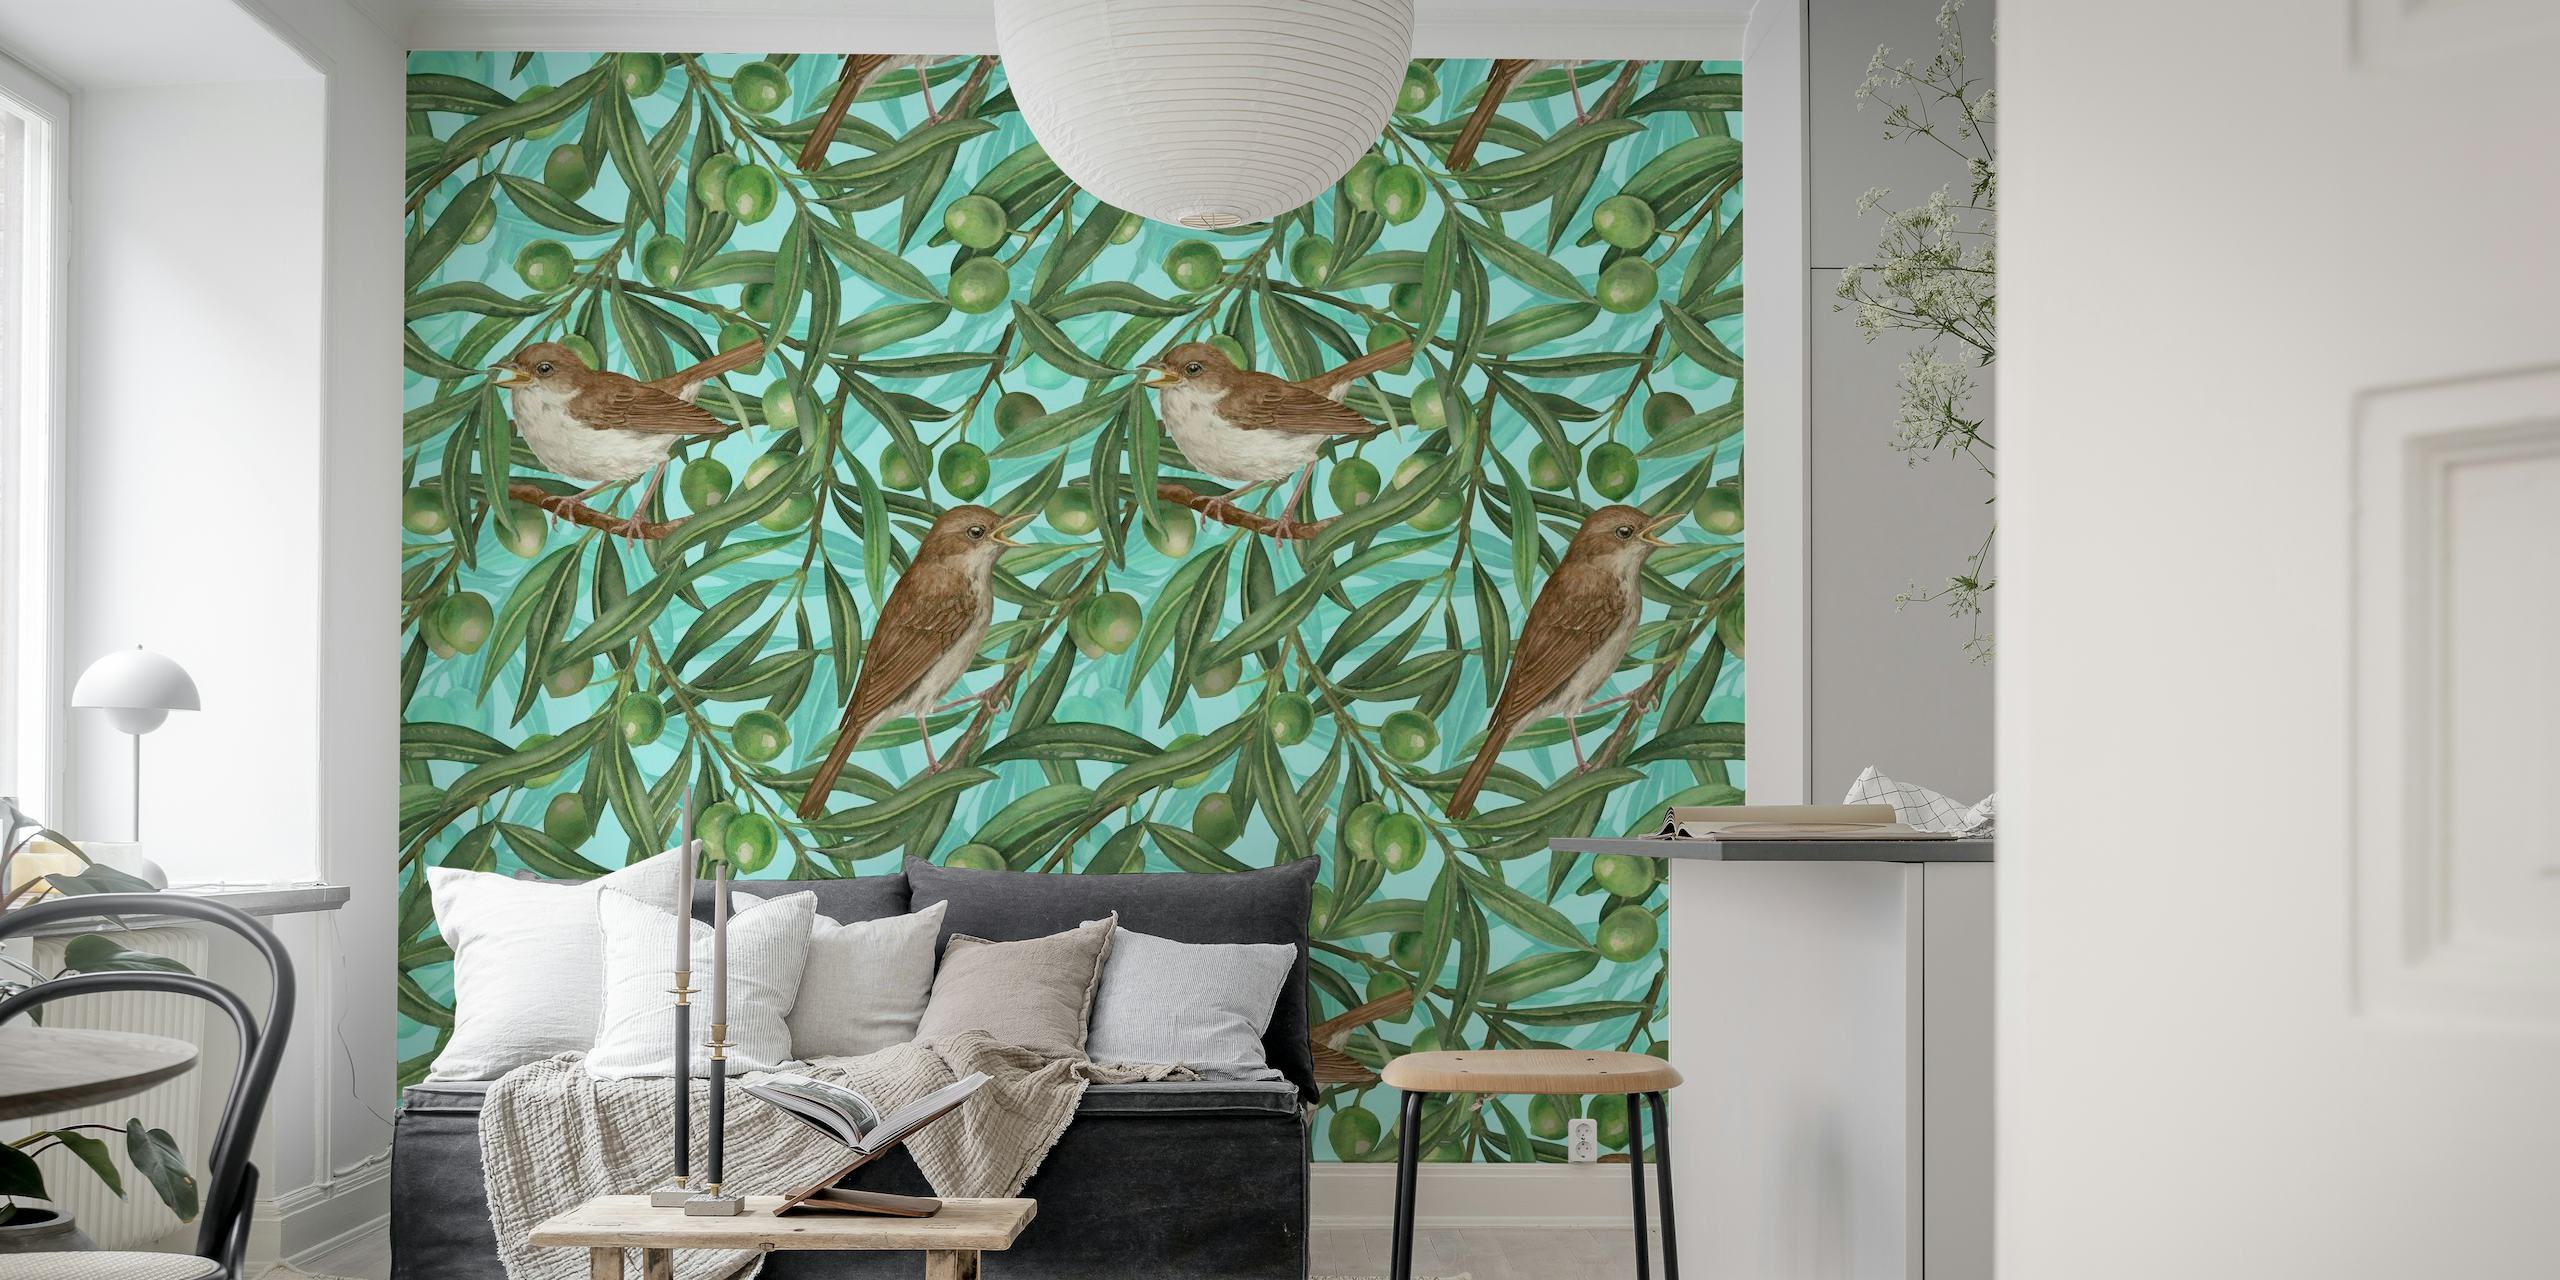 Illustrative wall mural of birds perched in olive trees with ripe olives